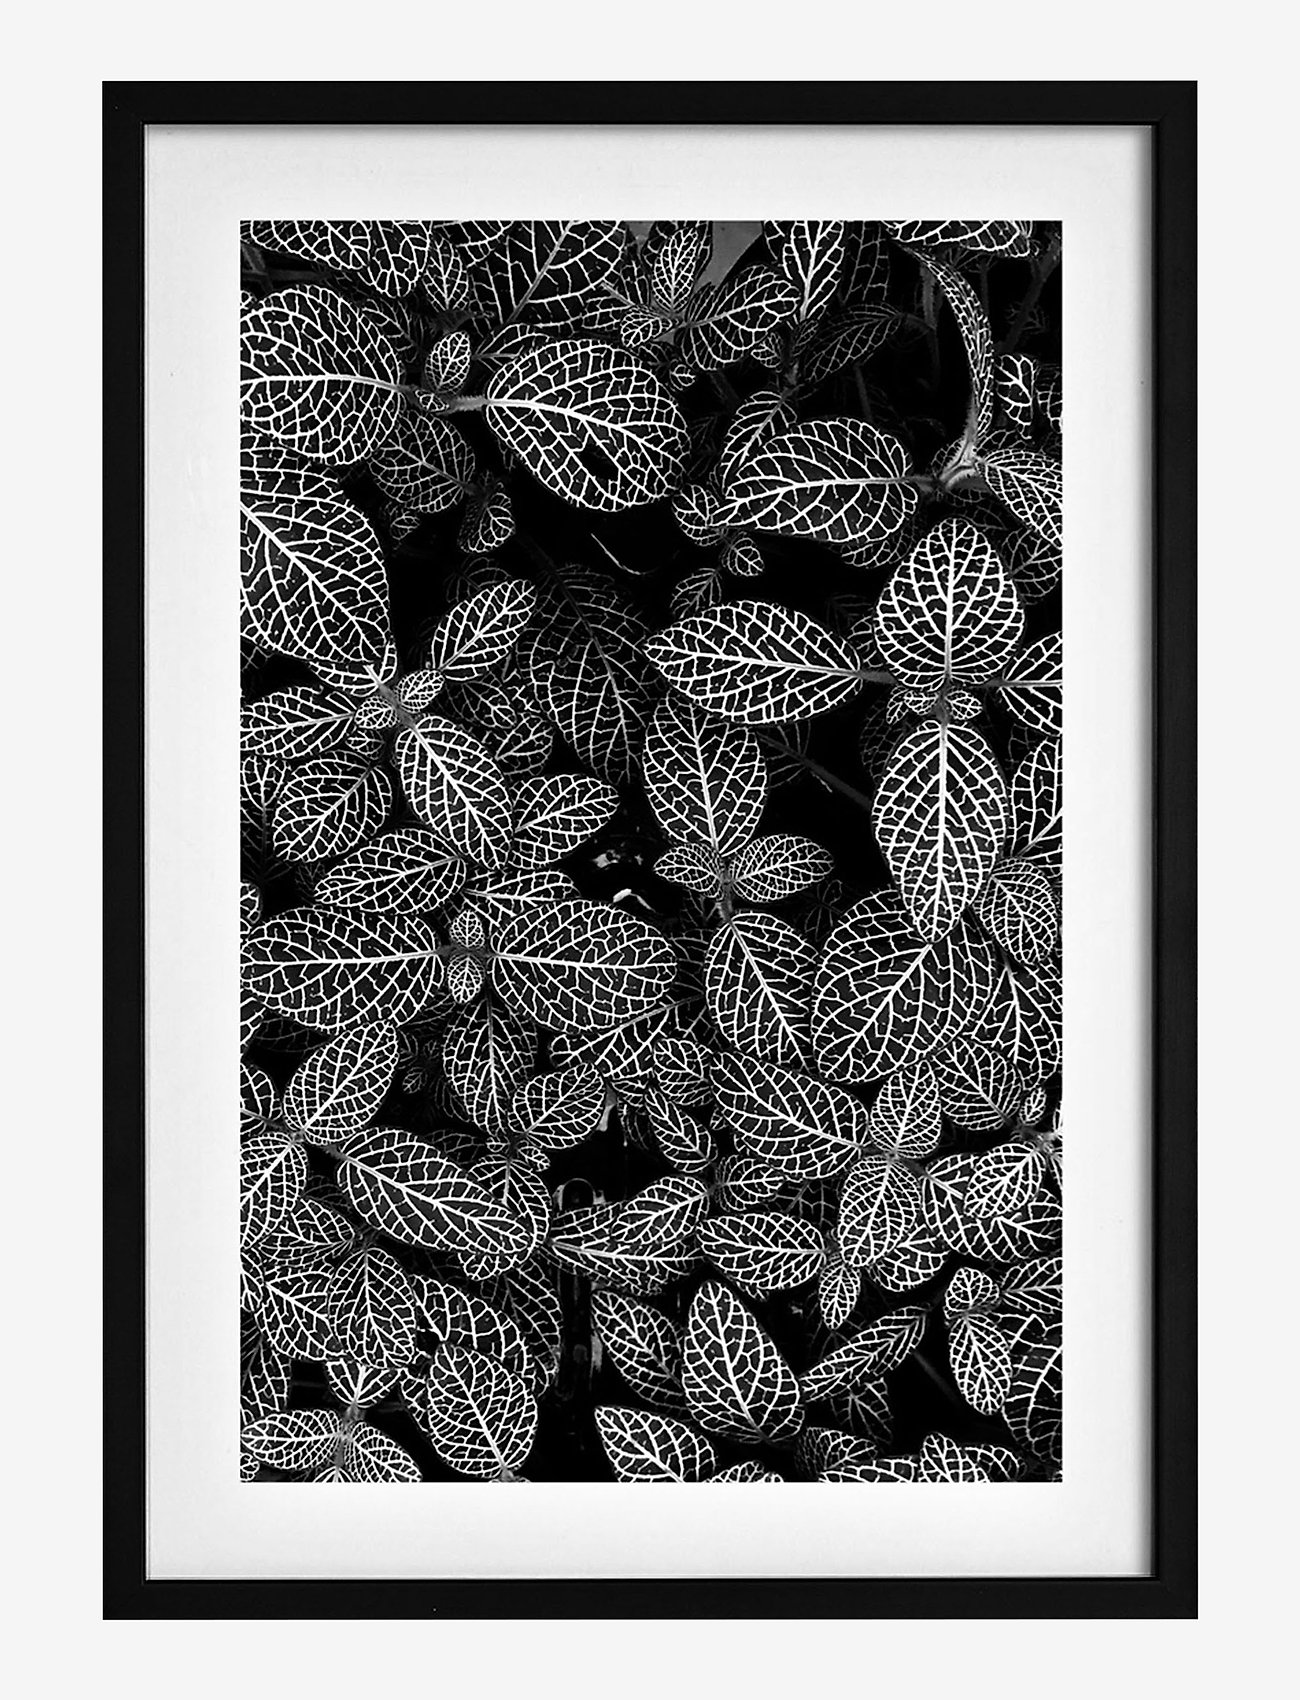 Democratic Gallery - Poster Abstract Plant - botaninis - black - 0